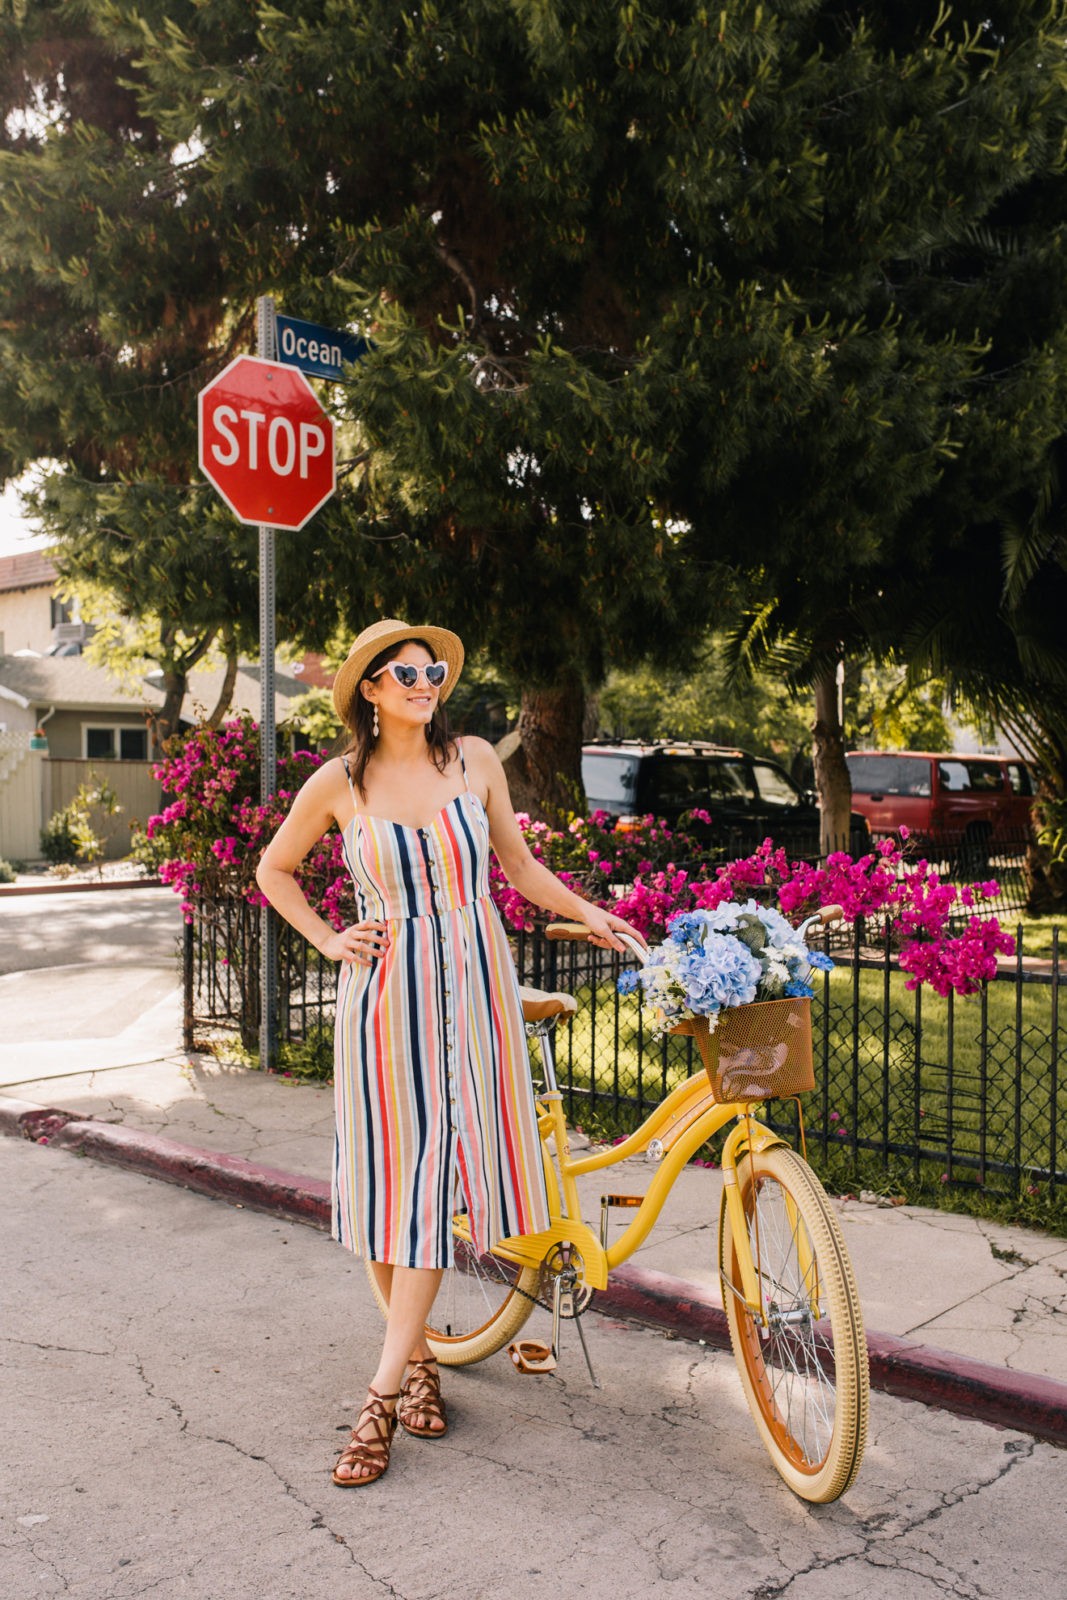 Stage Summer Moments, 2019 Summer Bucket List Moments by popular Los Angeles Lifestyle Blogger Laura Lily: image of woman standing next to Stage Stores yellow beach cruiser bike with bike basket full of flowers while wearing multi colored stripe spaghetti stripe dress, straw sun hat, brown gladiator sandals and pink heart shaped sunglasses.